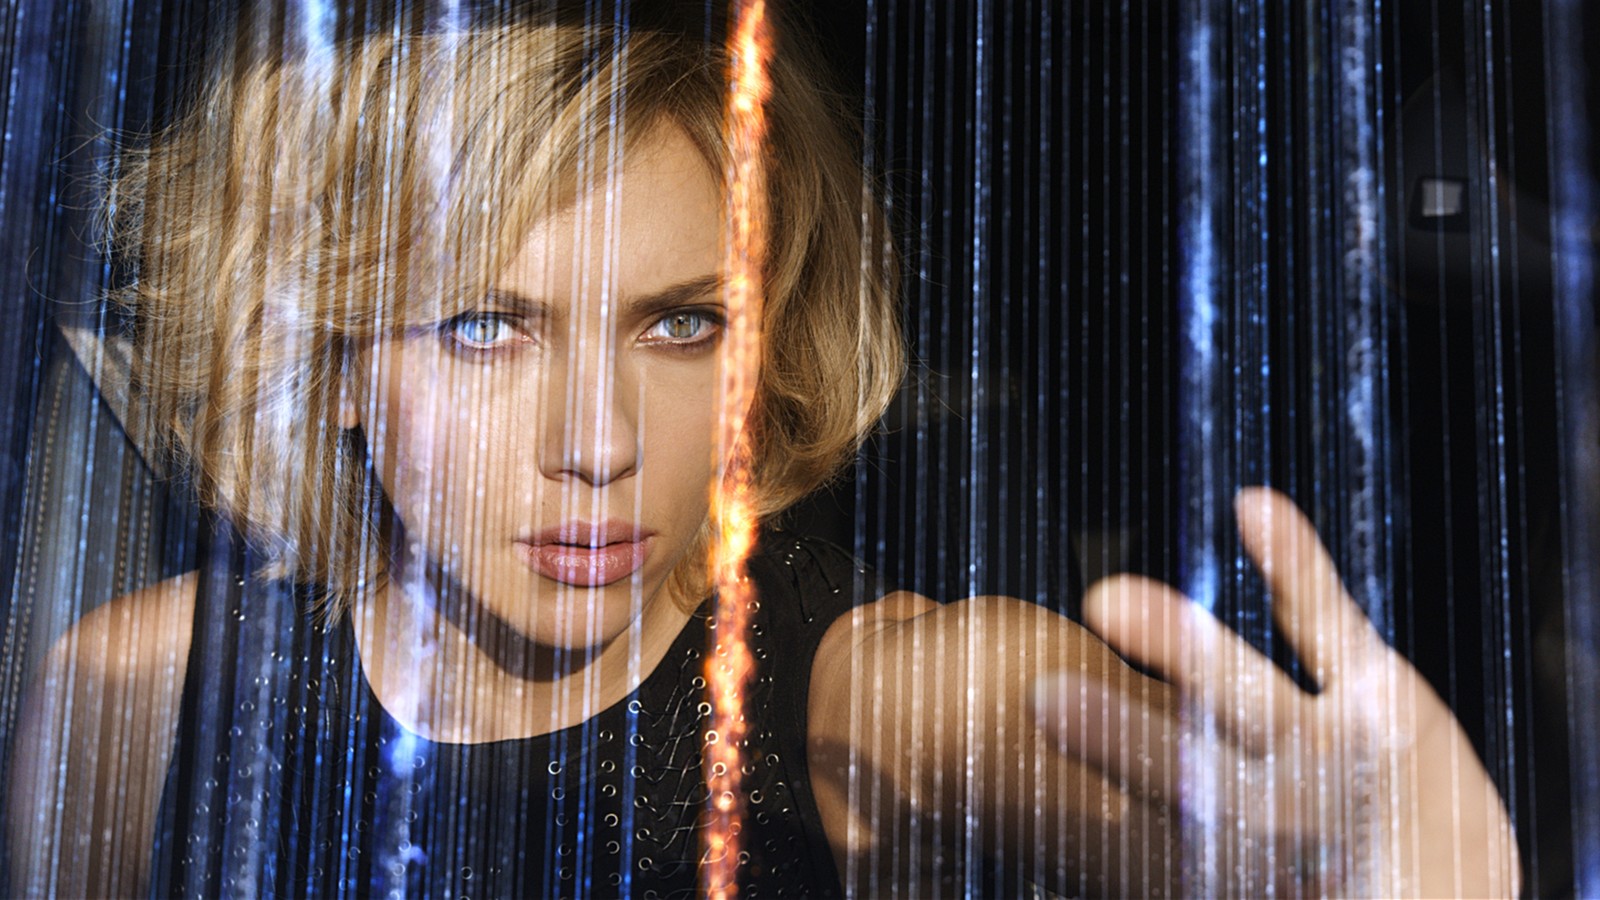 david druckman recommends Lucy Movie For Download